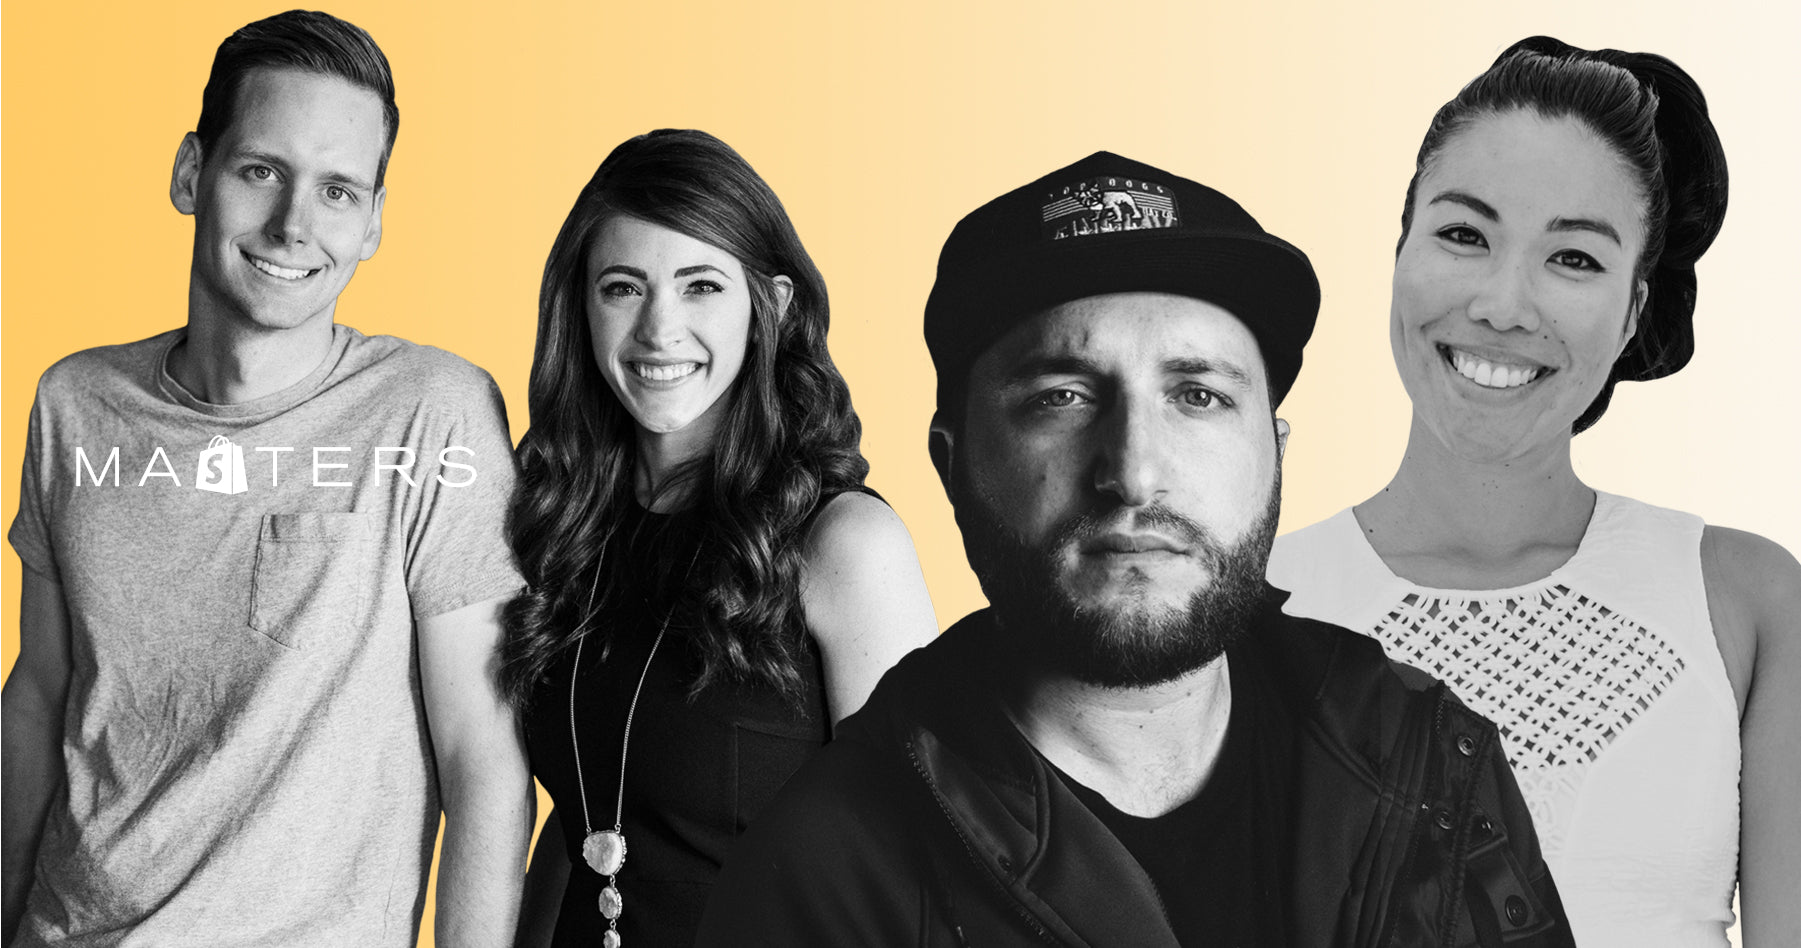  Patrick and Jennifer Coddou from Supply, Jimmy Findlay Hickey from Findlay Hats, and Katherine Gaskin from The Content Planner are guests on this roundup episode of Shopify Masters.